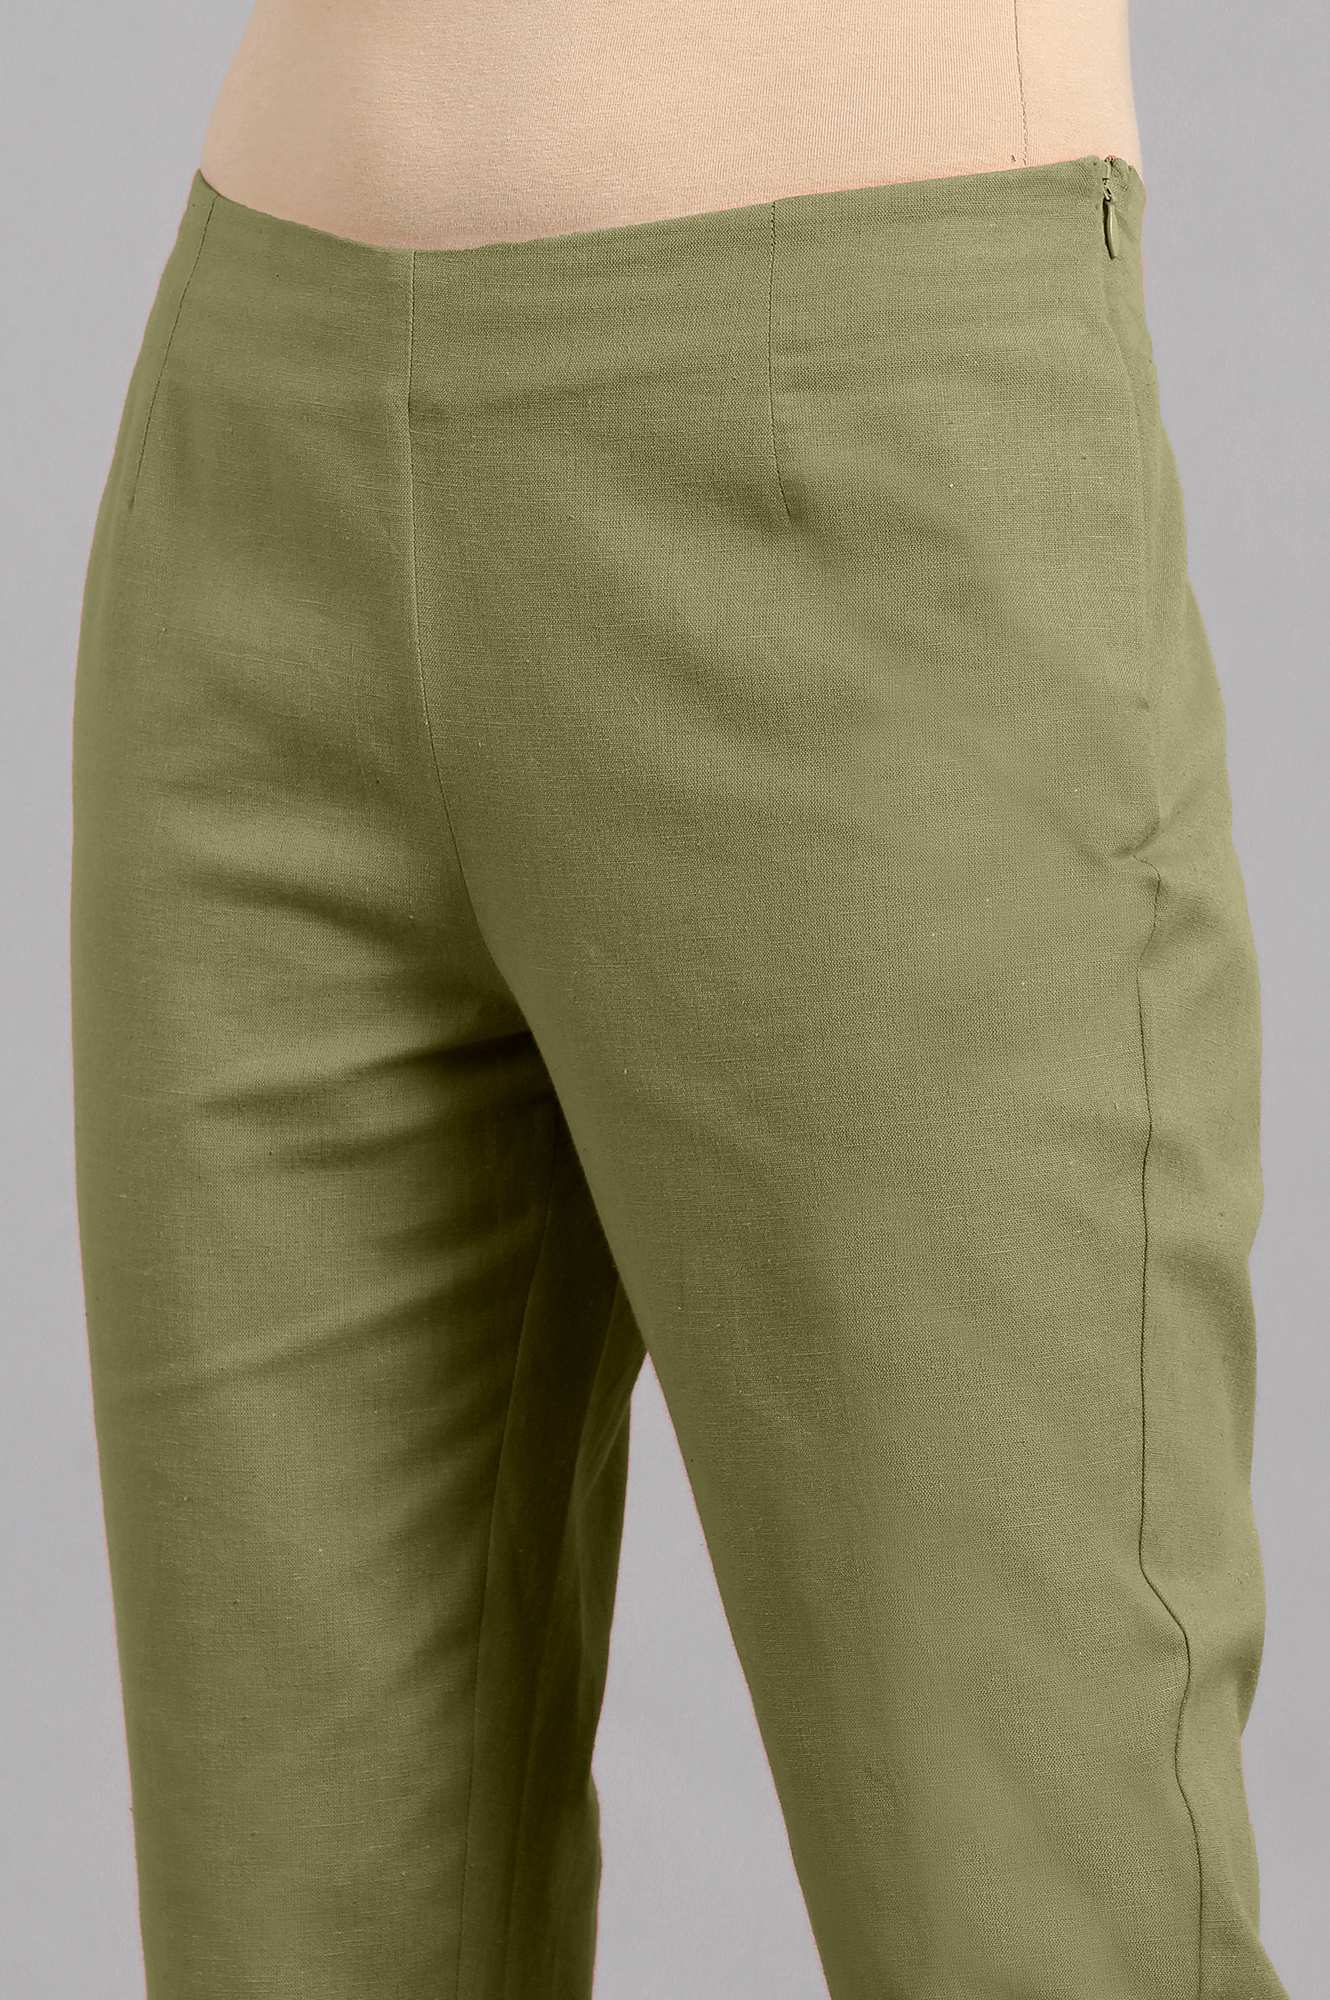 Olive Green Solid Trousers